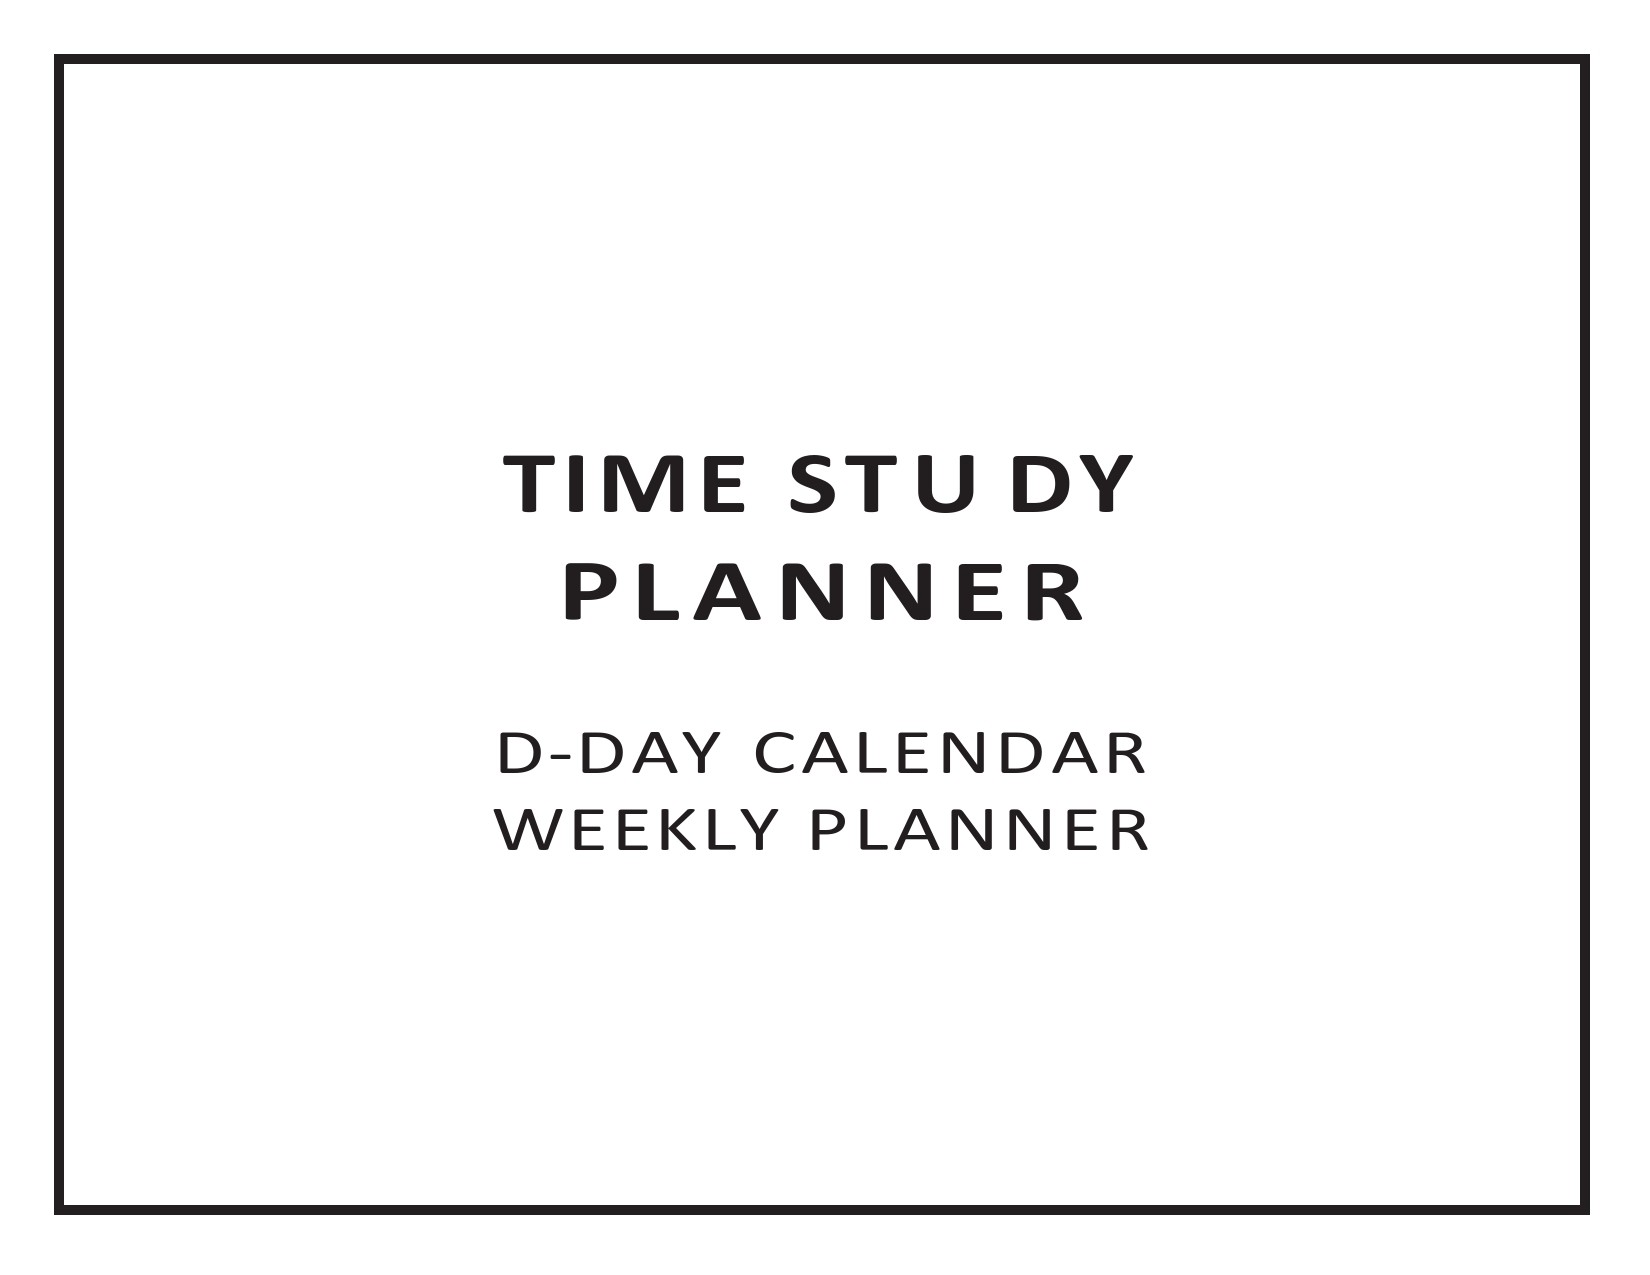 Free time study template 27